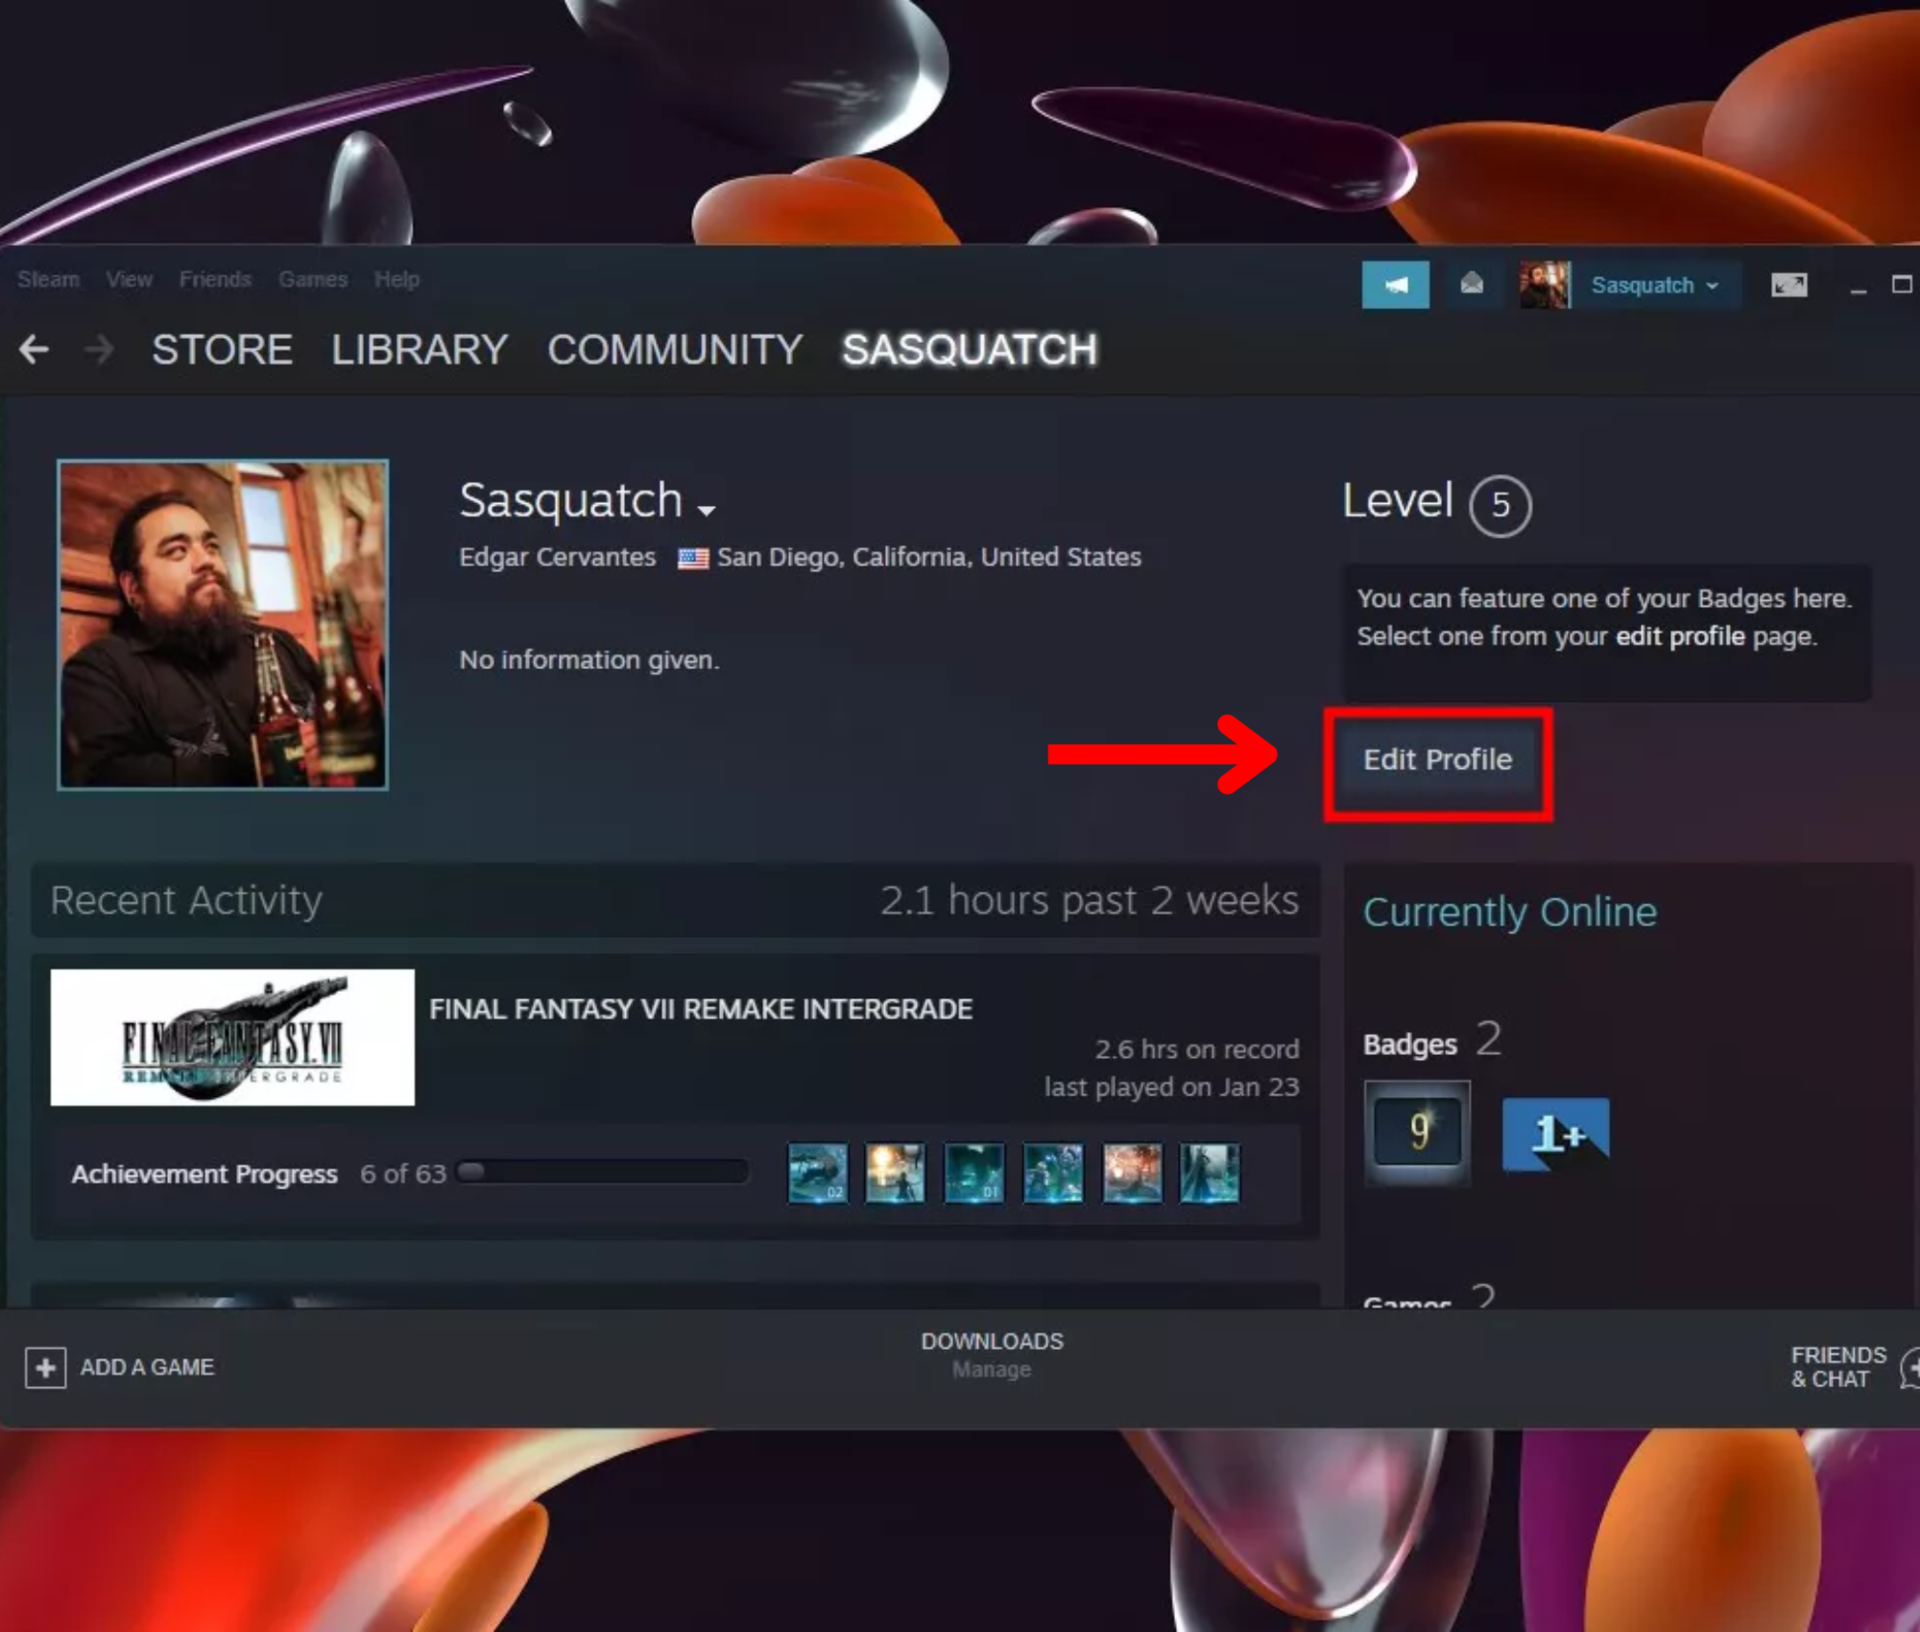 Can I hide games in my steam library/profile? : r/Steam